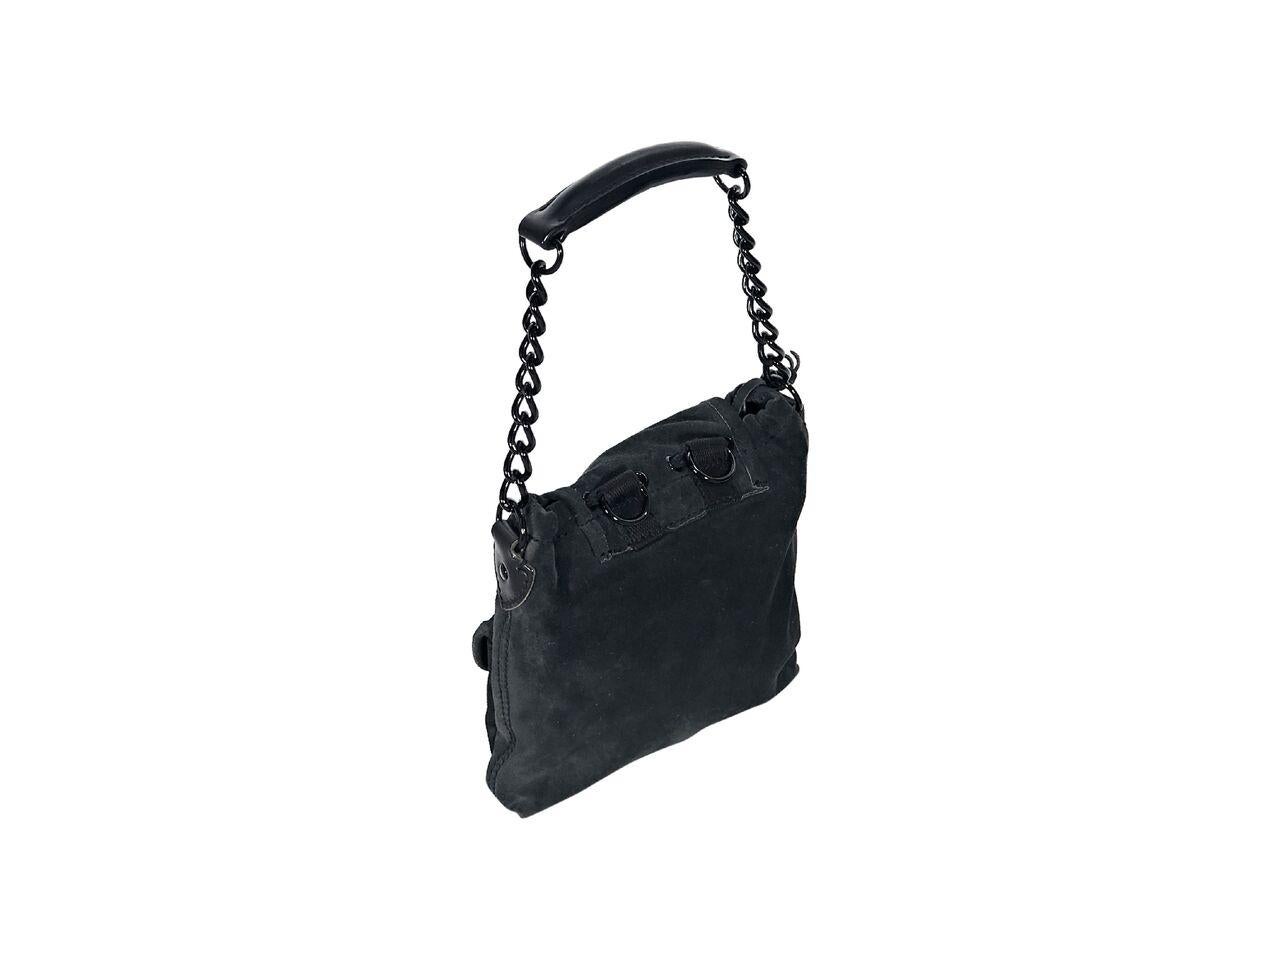 Product details:  Black suede mini sac shoulder bag by Balenciaga.  Single chain carry handle.  Detachable mirror.  Drawstring closure under front flap.  Lined interior with inner zip pocket.  Dual front exterior flap pockets.  Black hardware.  7